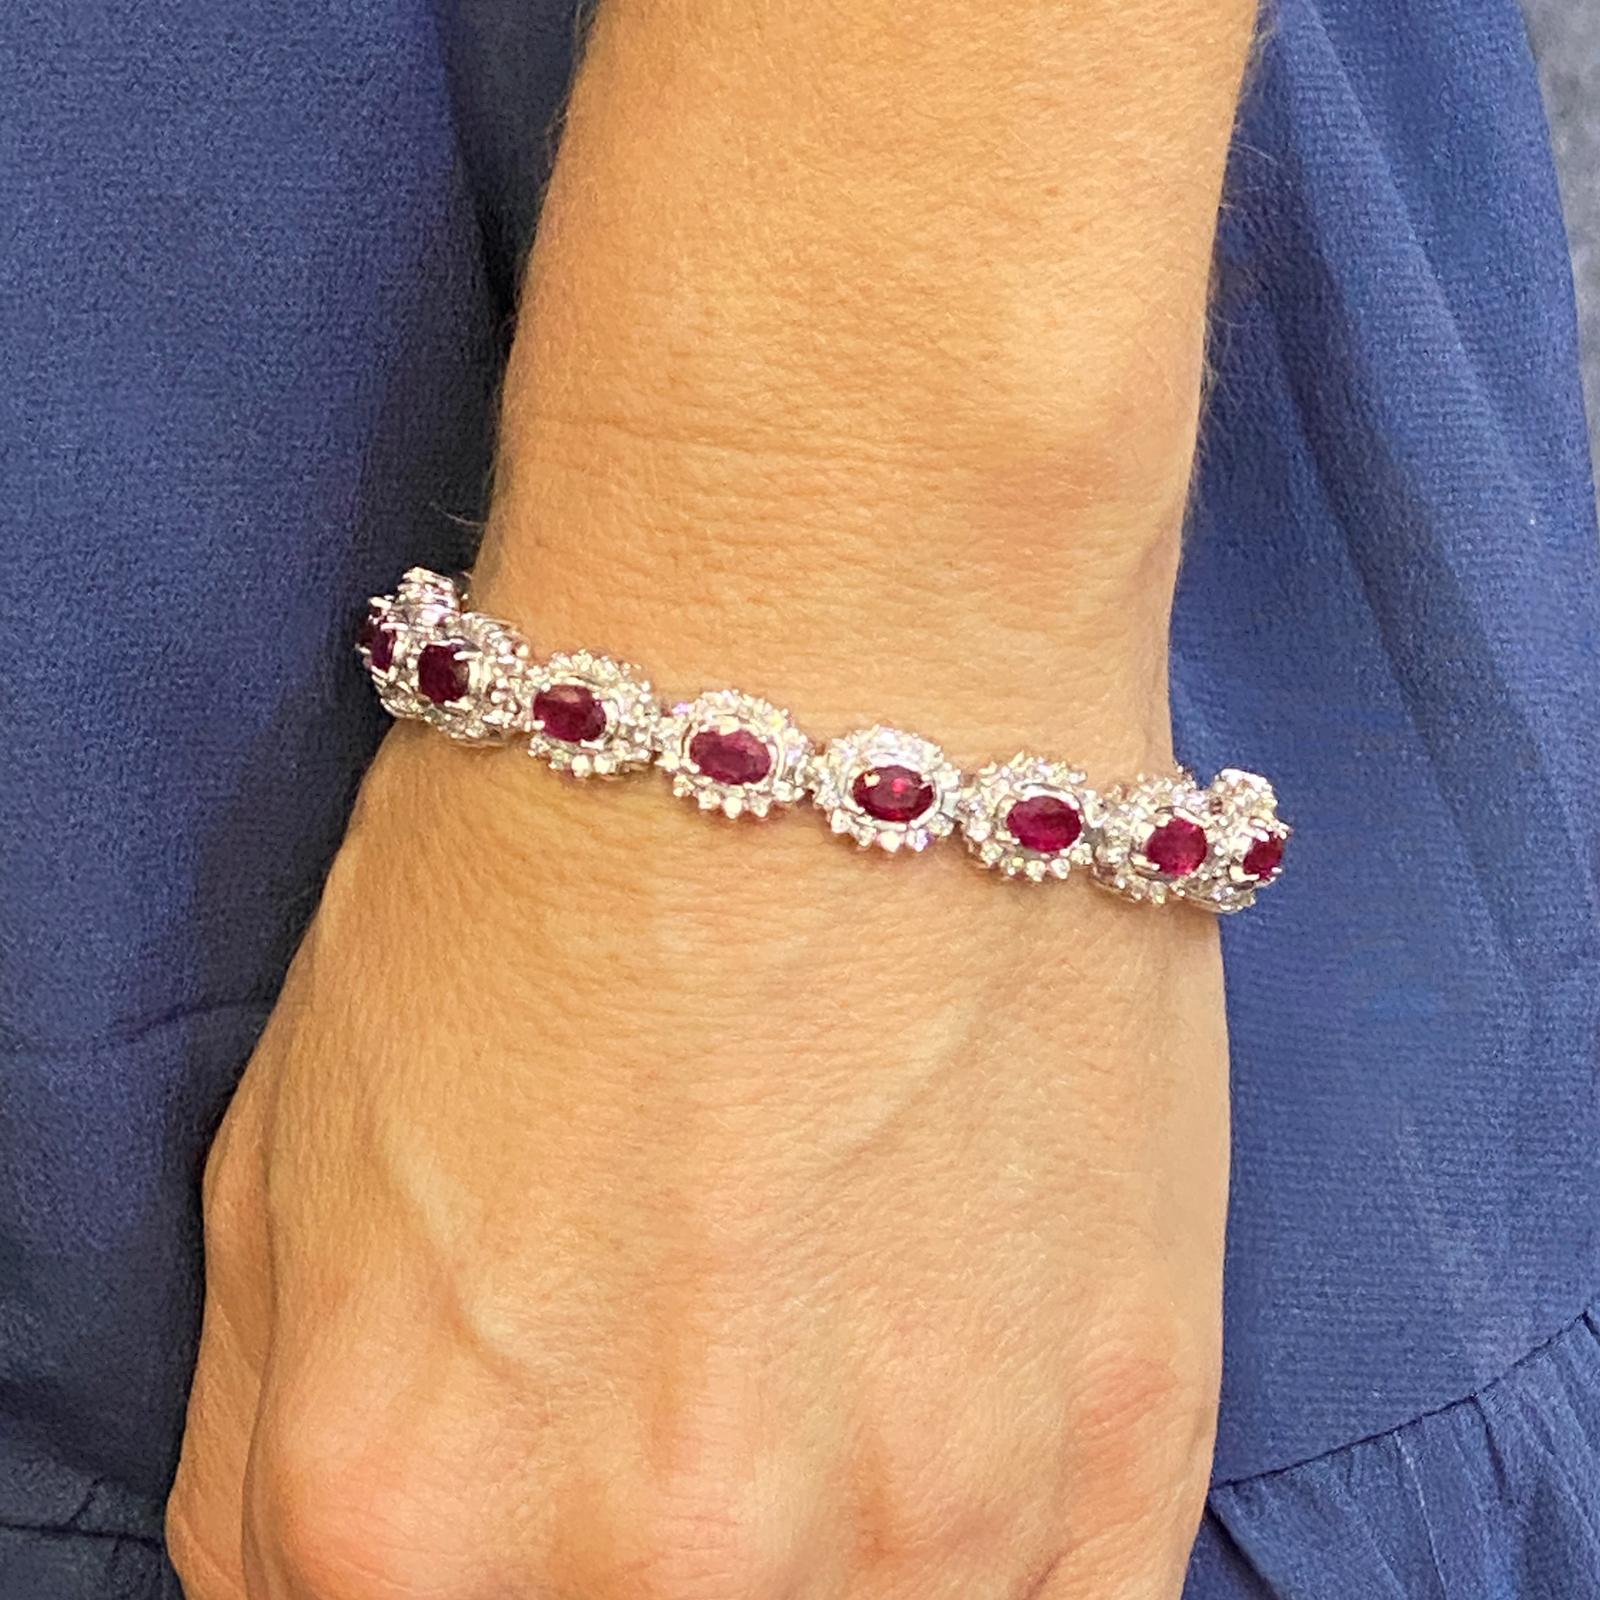 Burma ruby diamond bracelet fashioned in 14 karat white gold. The bracelet features 16 beautifully matching oval Burma rubies weighing 10.24 carat total weight, and the vivid red color is called 
